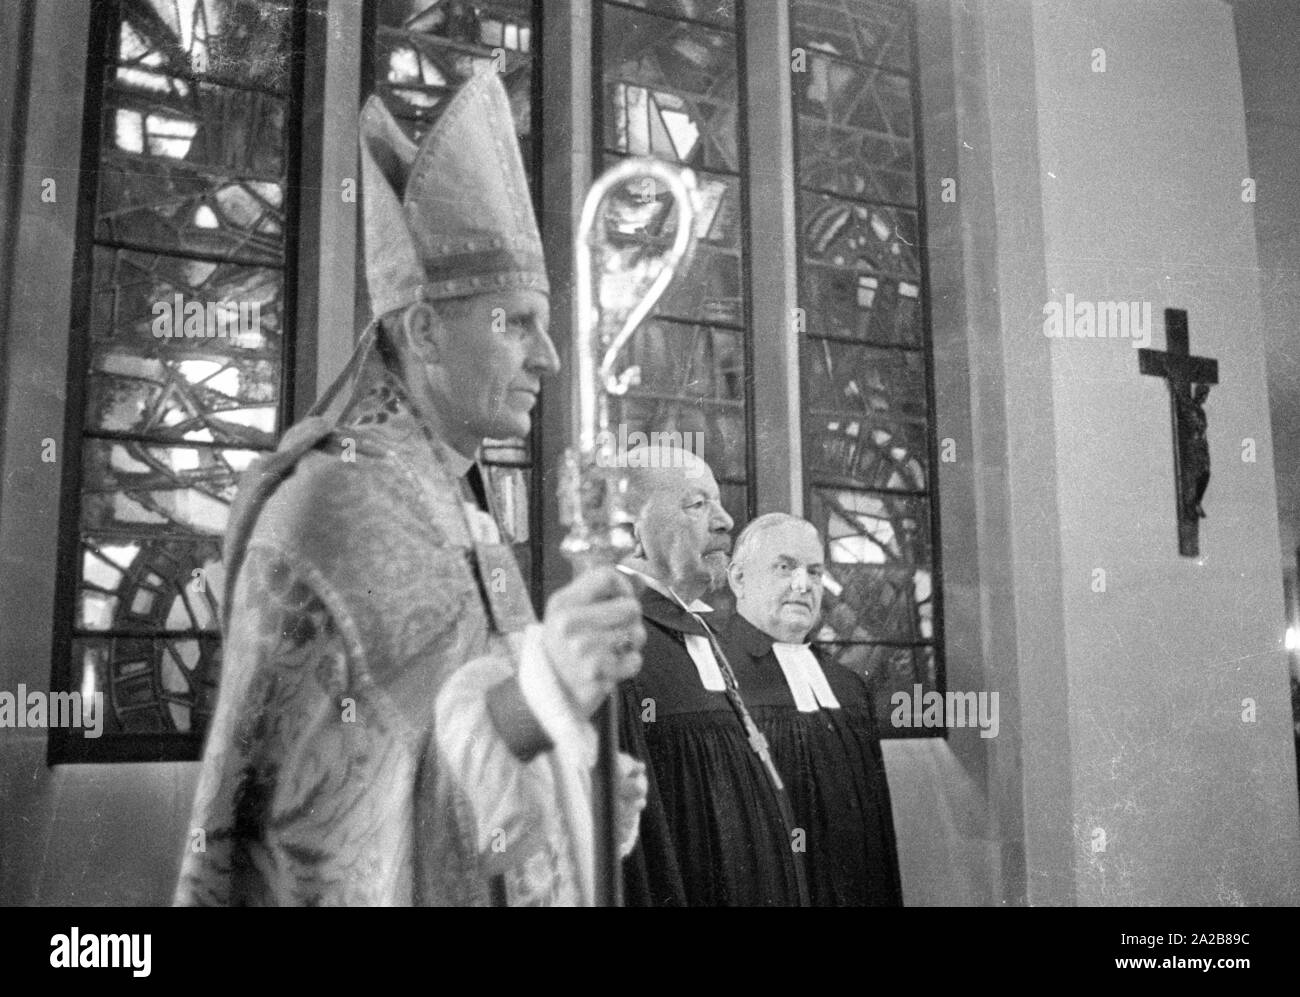 The German bishop, Otto Dibelius, participates at the groundbreaking ceremony  of the 'International Center for Reconciliation' in the ruin of the destroyed St Michael's Cathedral. To his left, a representative of the Church of England. Stock Photo